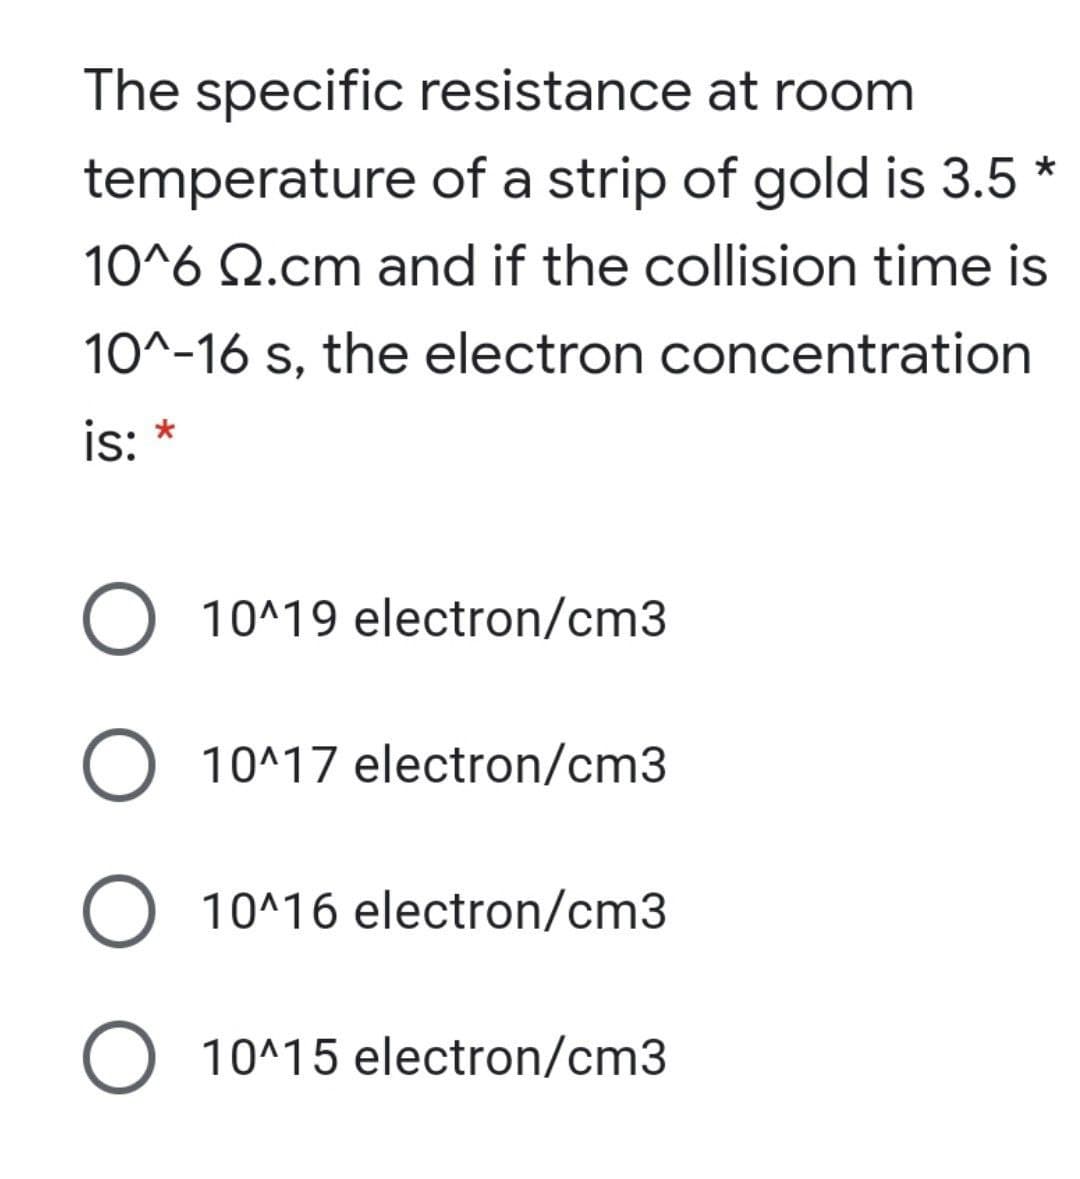 The specific resistance at room
temperature of a strip of gold is 3.5 *
10^6 Q.cm and if the collision time is
10^-16 s, the electron concentration
is:
O 10^19 electron/cm3
10^17 electron/cm3
O 10^16 electron/cm3
O 10^15 electron/cm3
